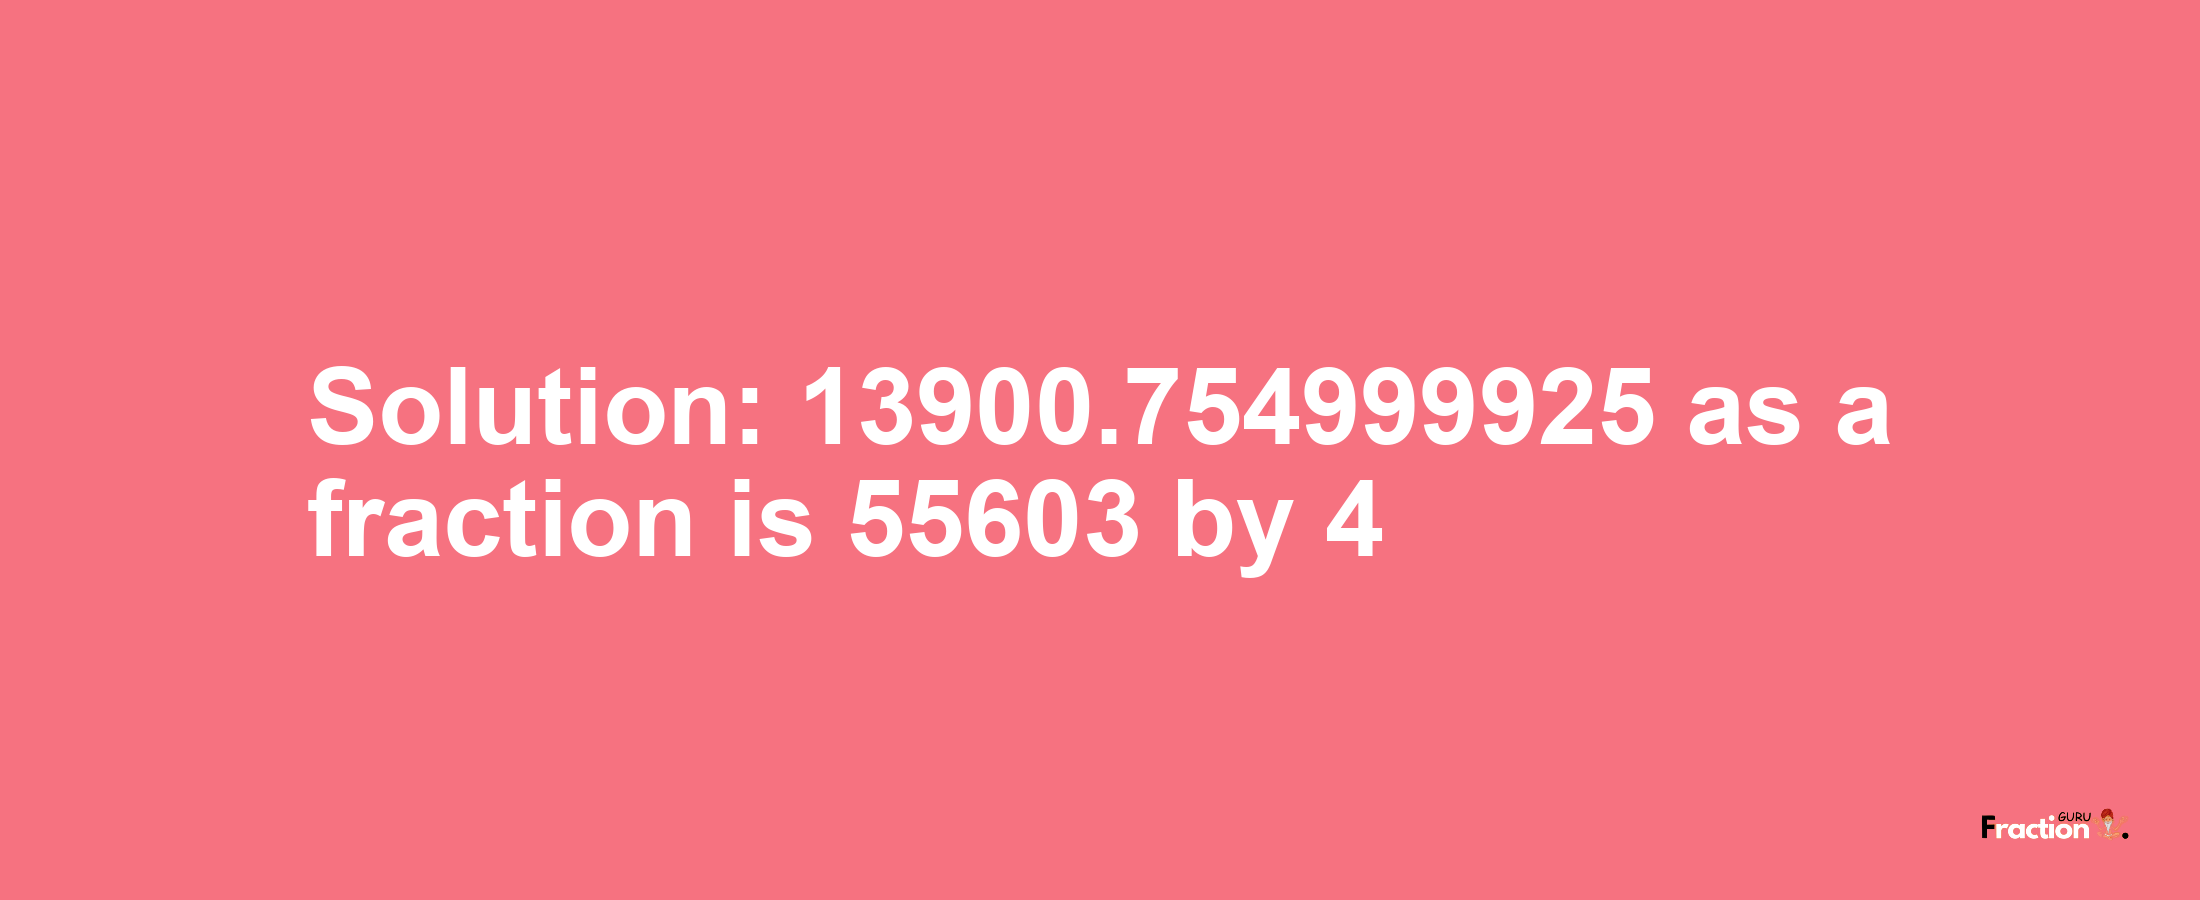 Solution:13900.754999925 as a fraction is 55603/4